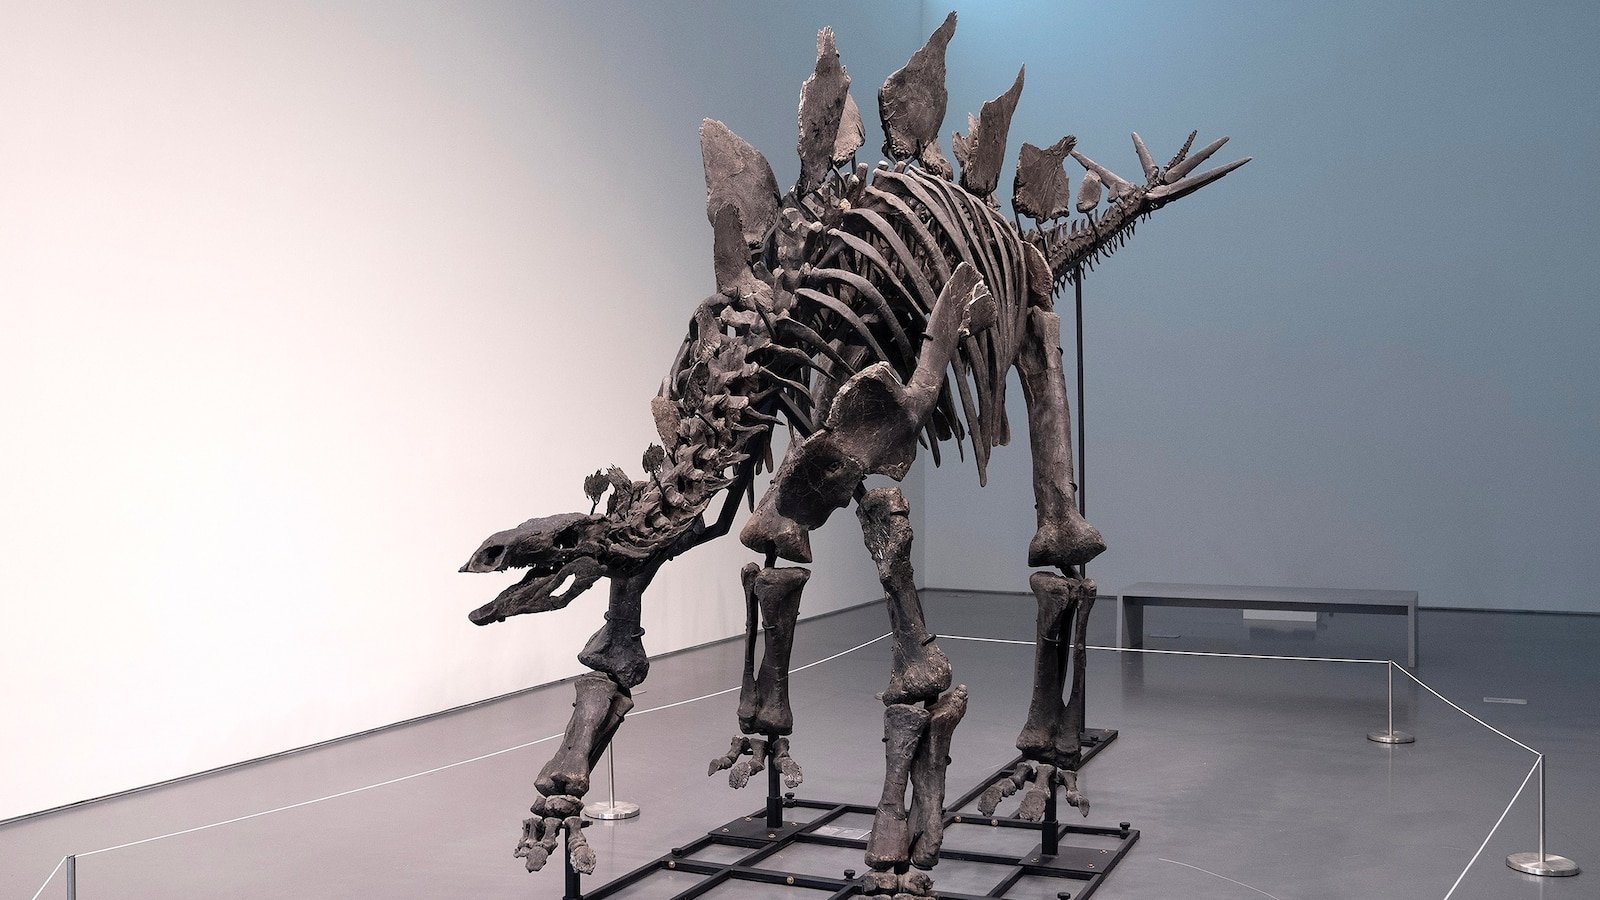 Stegosaurus skeleton, nicknamed 'Apex,' sells for record $44.6M at Sotheby's auction